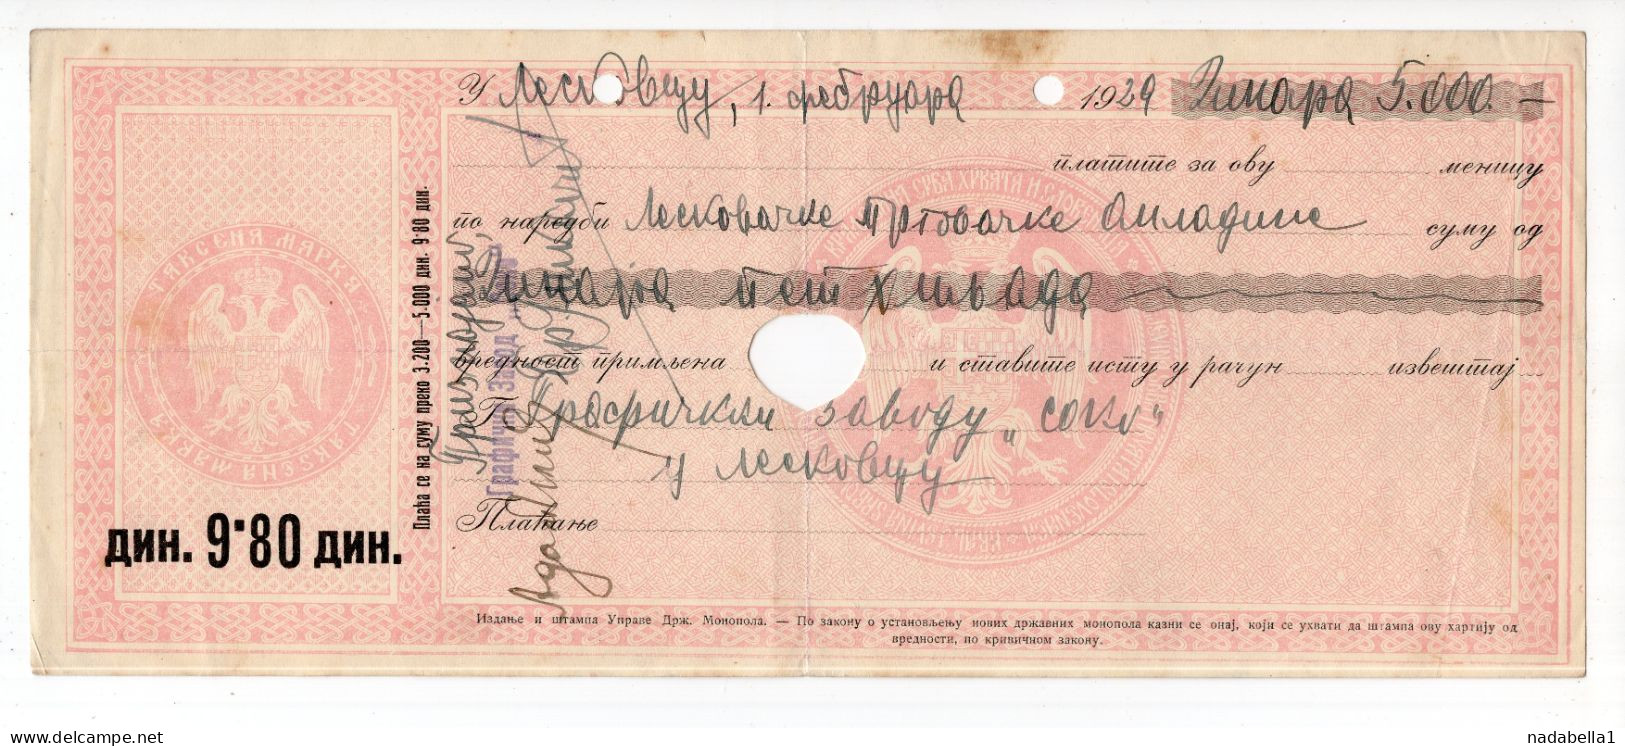 1929. KINGDOM OF SHS,SERBIA,LESKOVAC,CHEQUE,BILL OF EXCHANGE,9.80 DIN REVENUE IMPRINTED STAMP,USED - Chèques & Chèques De Voyage